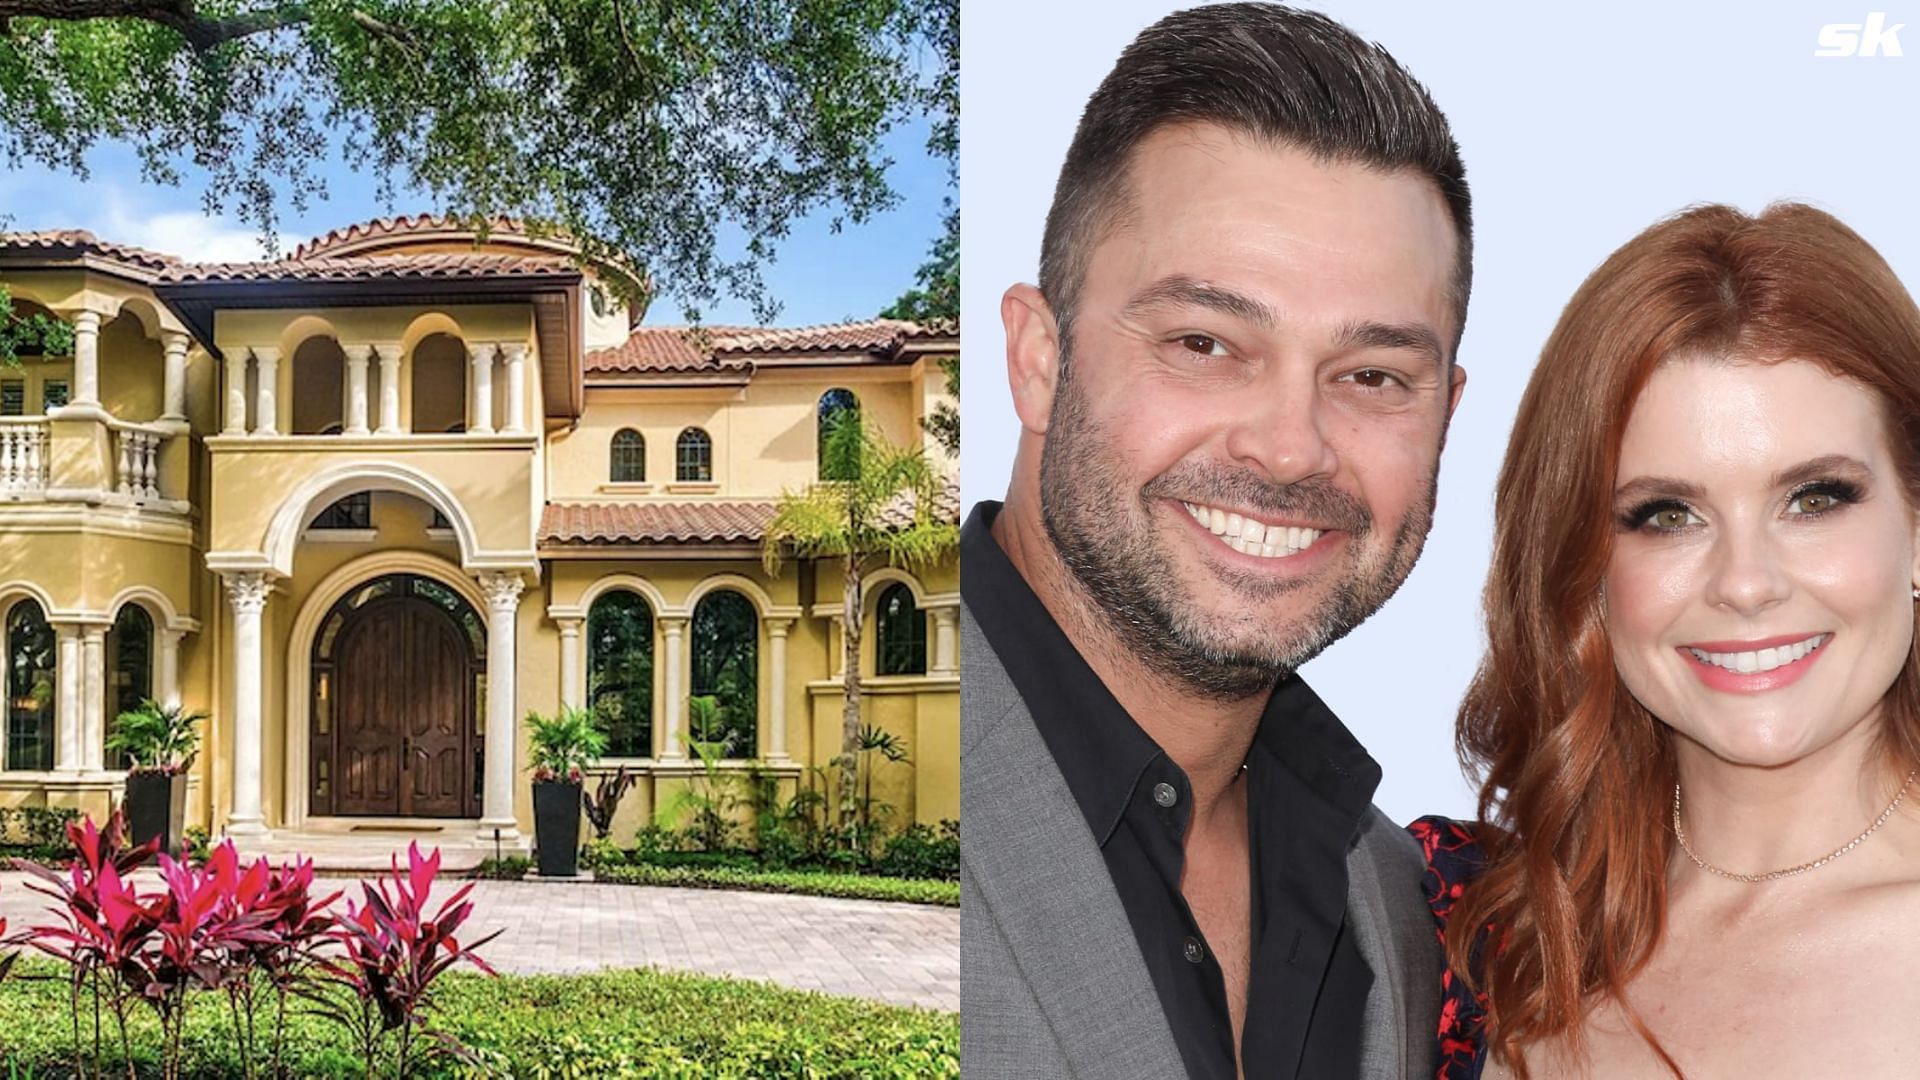 Nick Swisher and wife JoAnna Garcia sold their lavish Tampa mansion for $3 million